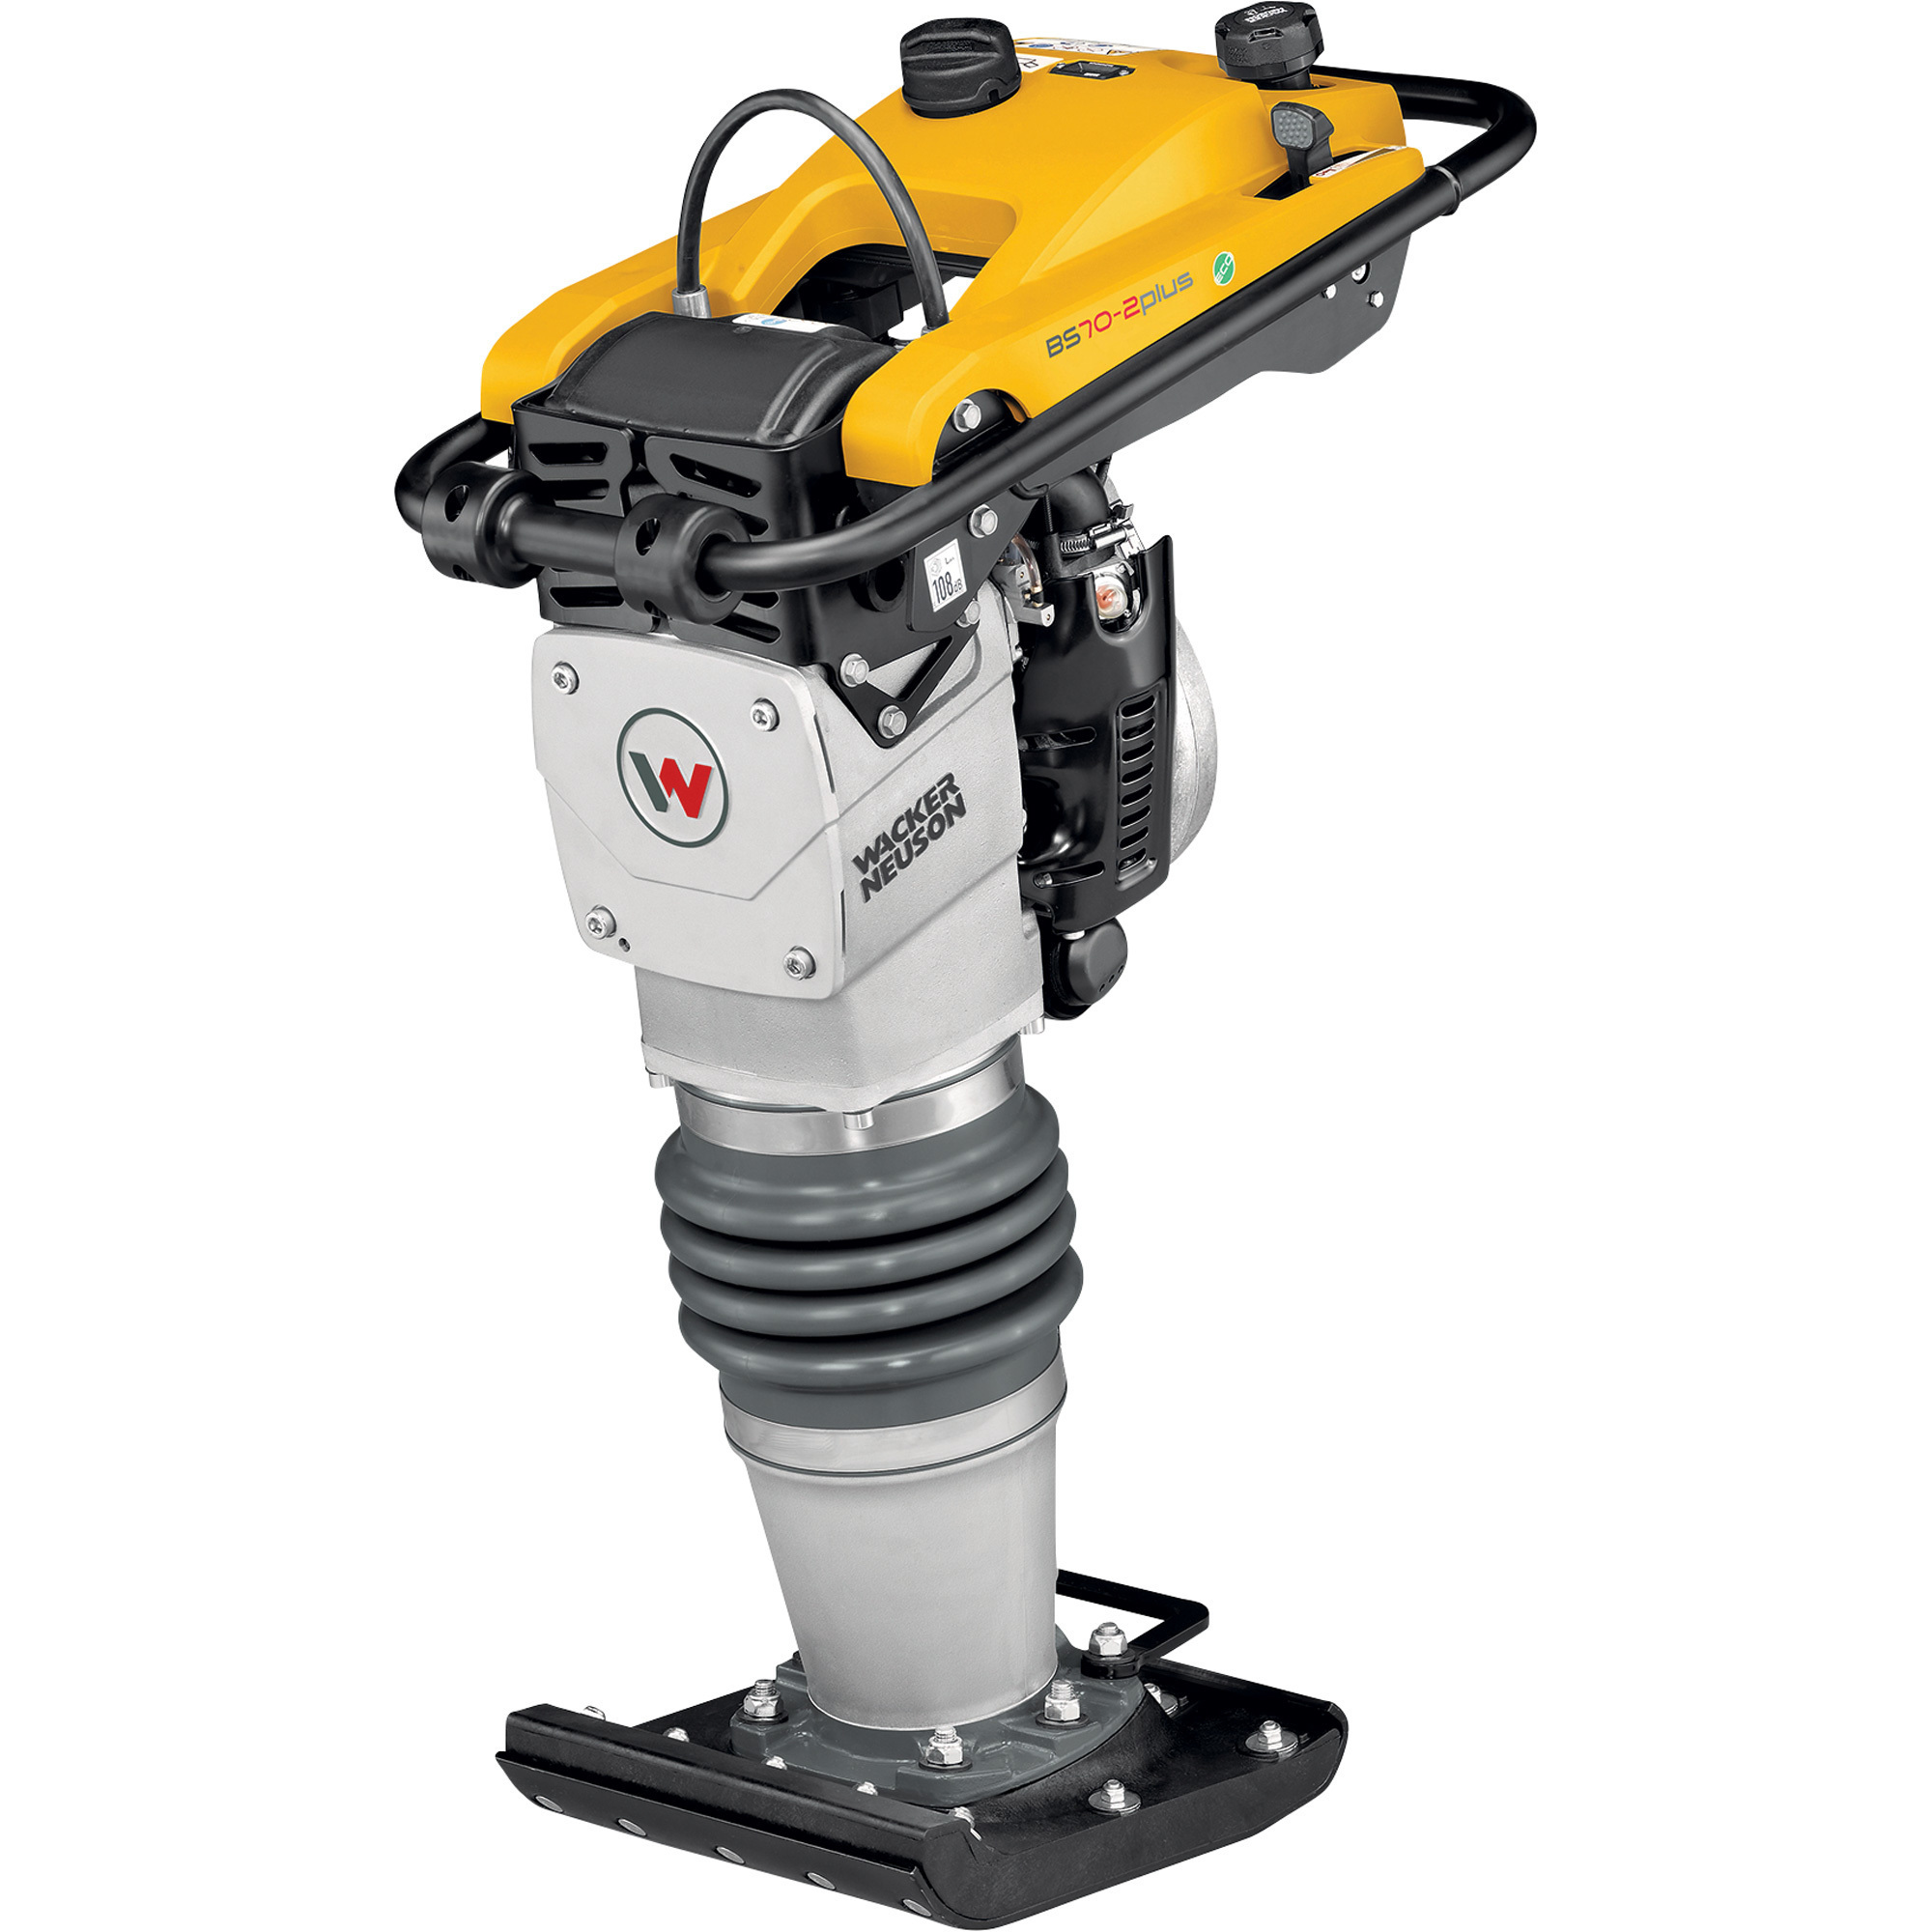 Wacker Neuson 4AS Compaction Rammer, 2.7 HP, Air-cooled, 1-Cylinder, Gas Engine, Model WN BS70-2PLUS